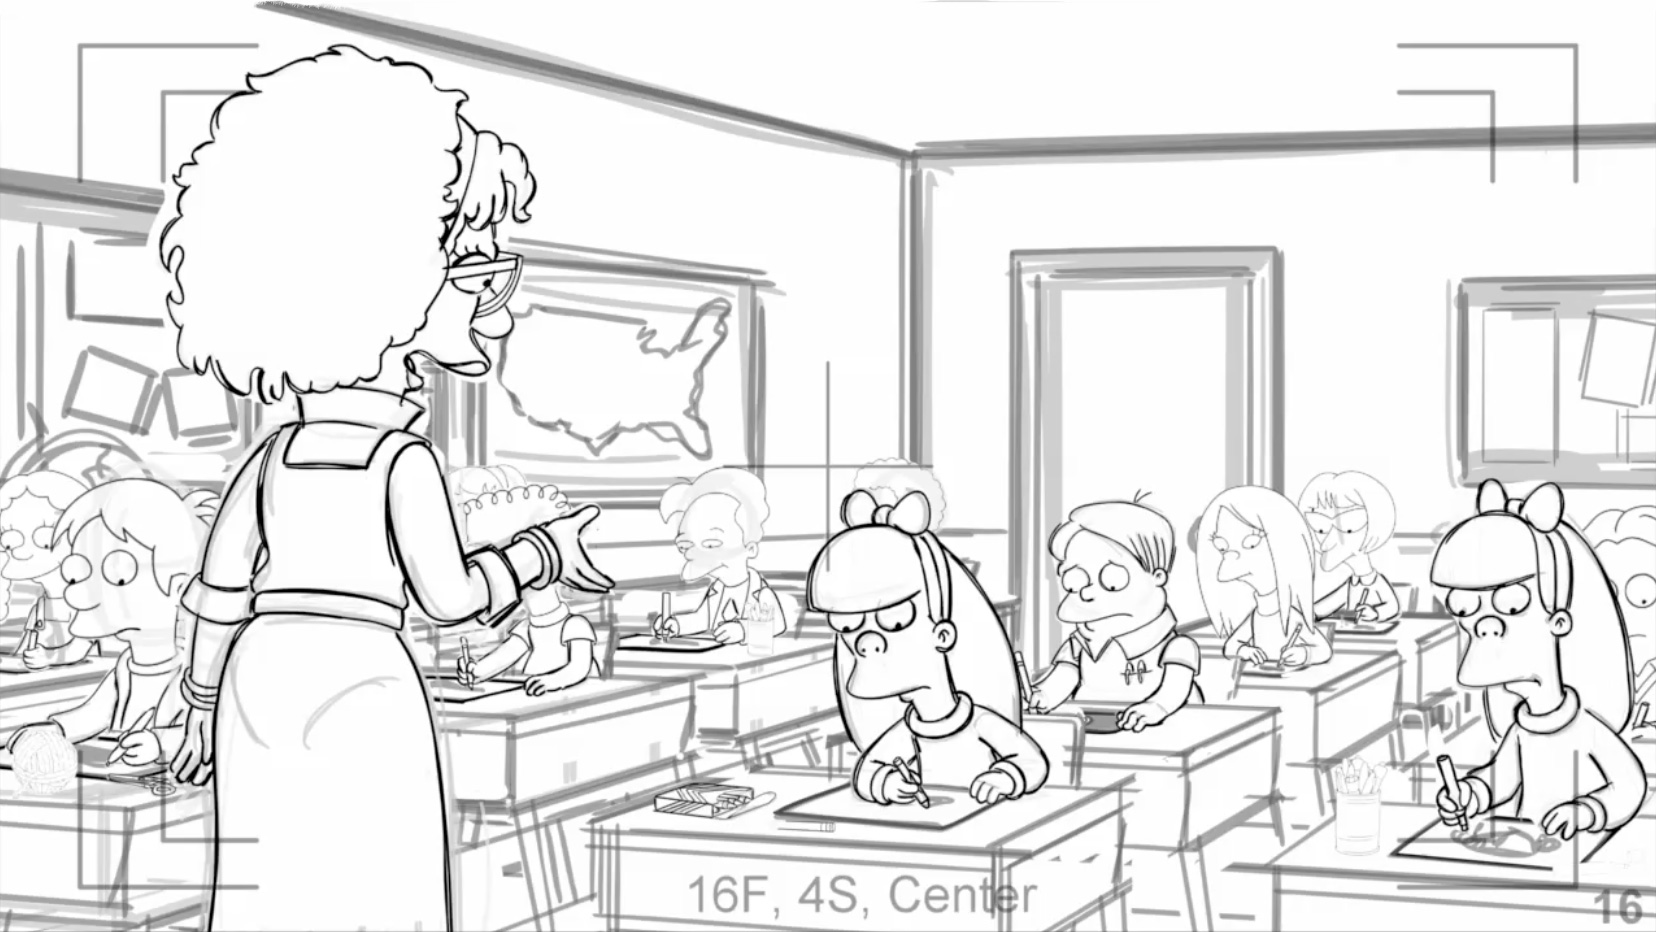 A layout drawing Richner did for another episode. Both aired in season 33. (The Simpsons is currently in its 34th season).